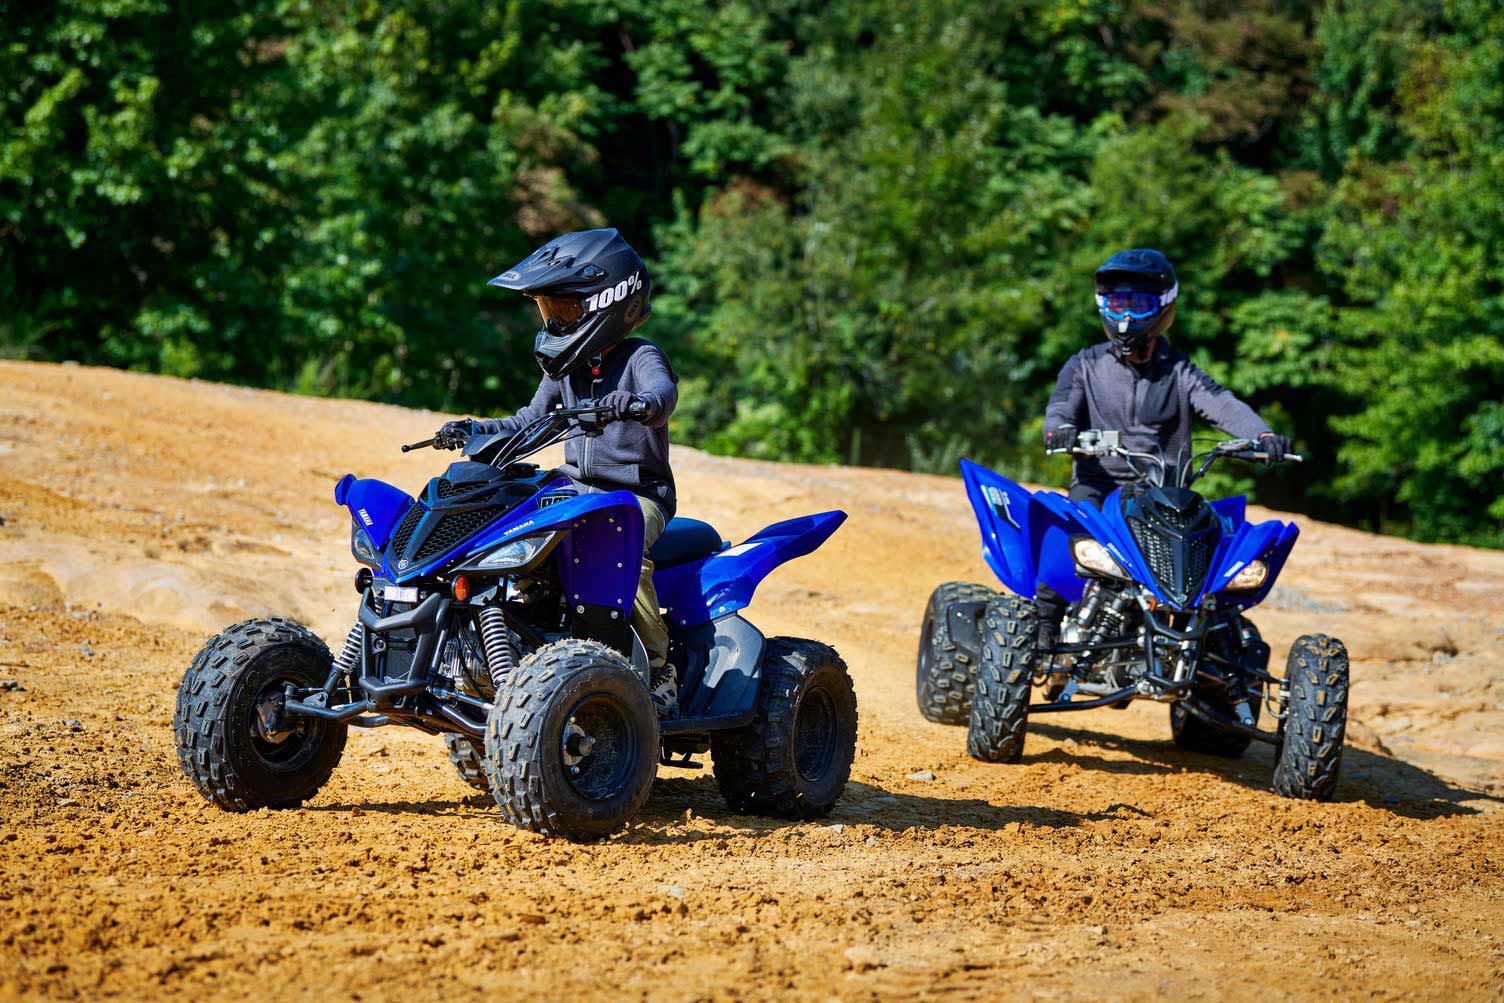 As the holidays approach, it’s high time to get ahold of an ATV for your little tykes and get them outside in 2022.